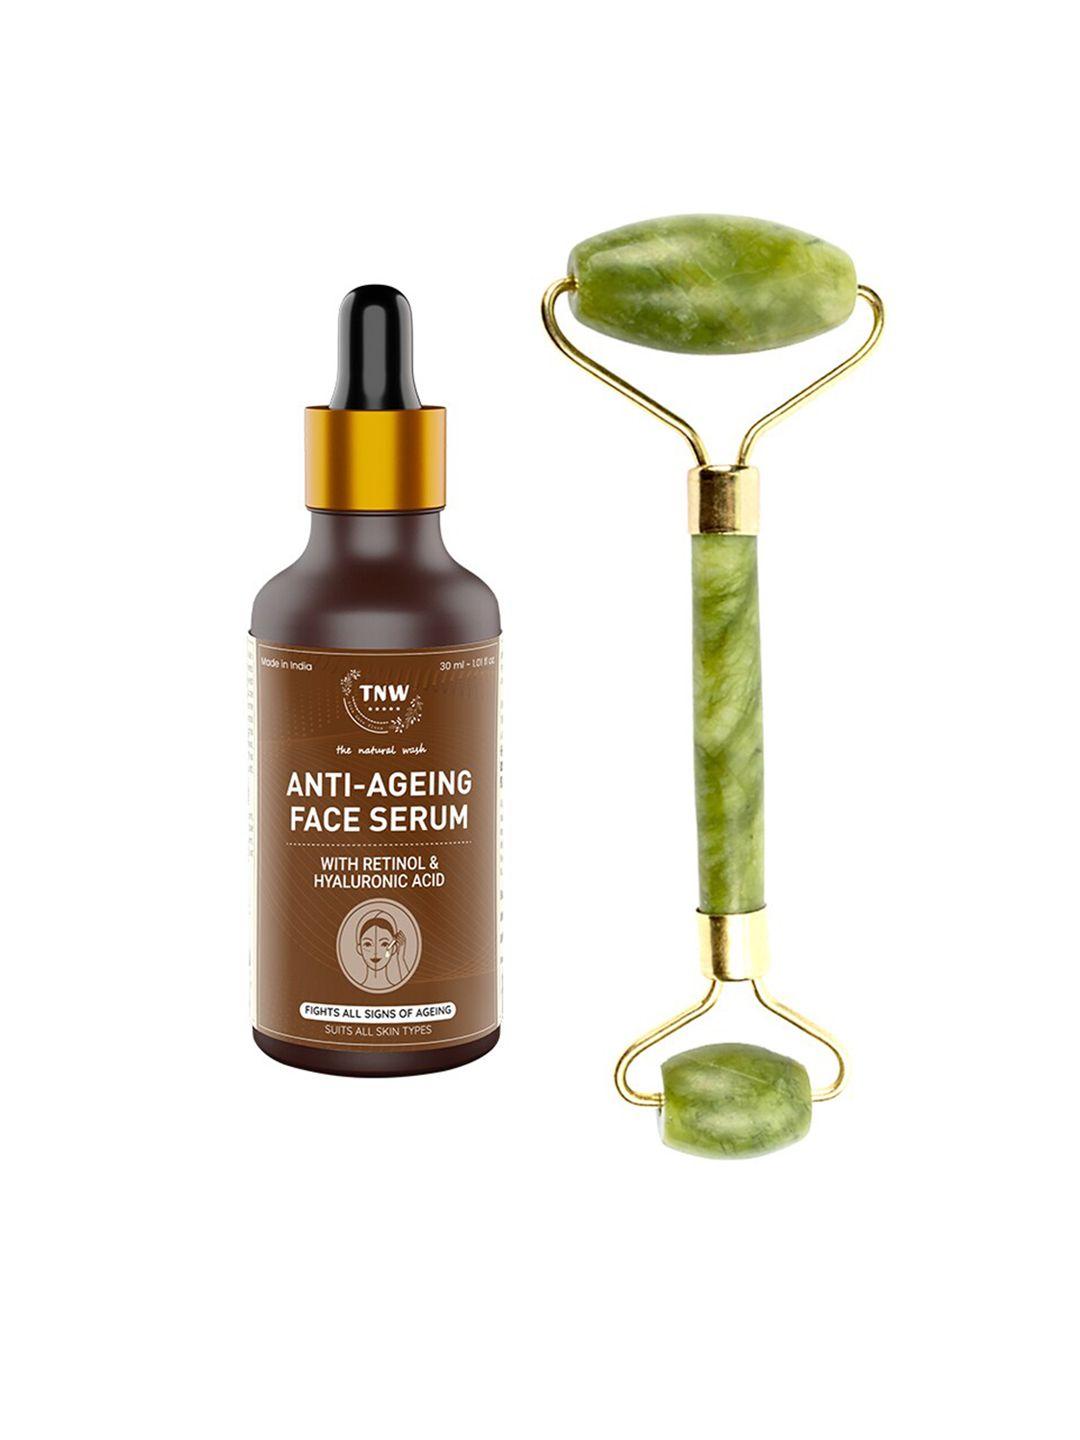 tnw the natural wash set of anti aging face serum 30ml & jade roller- green